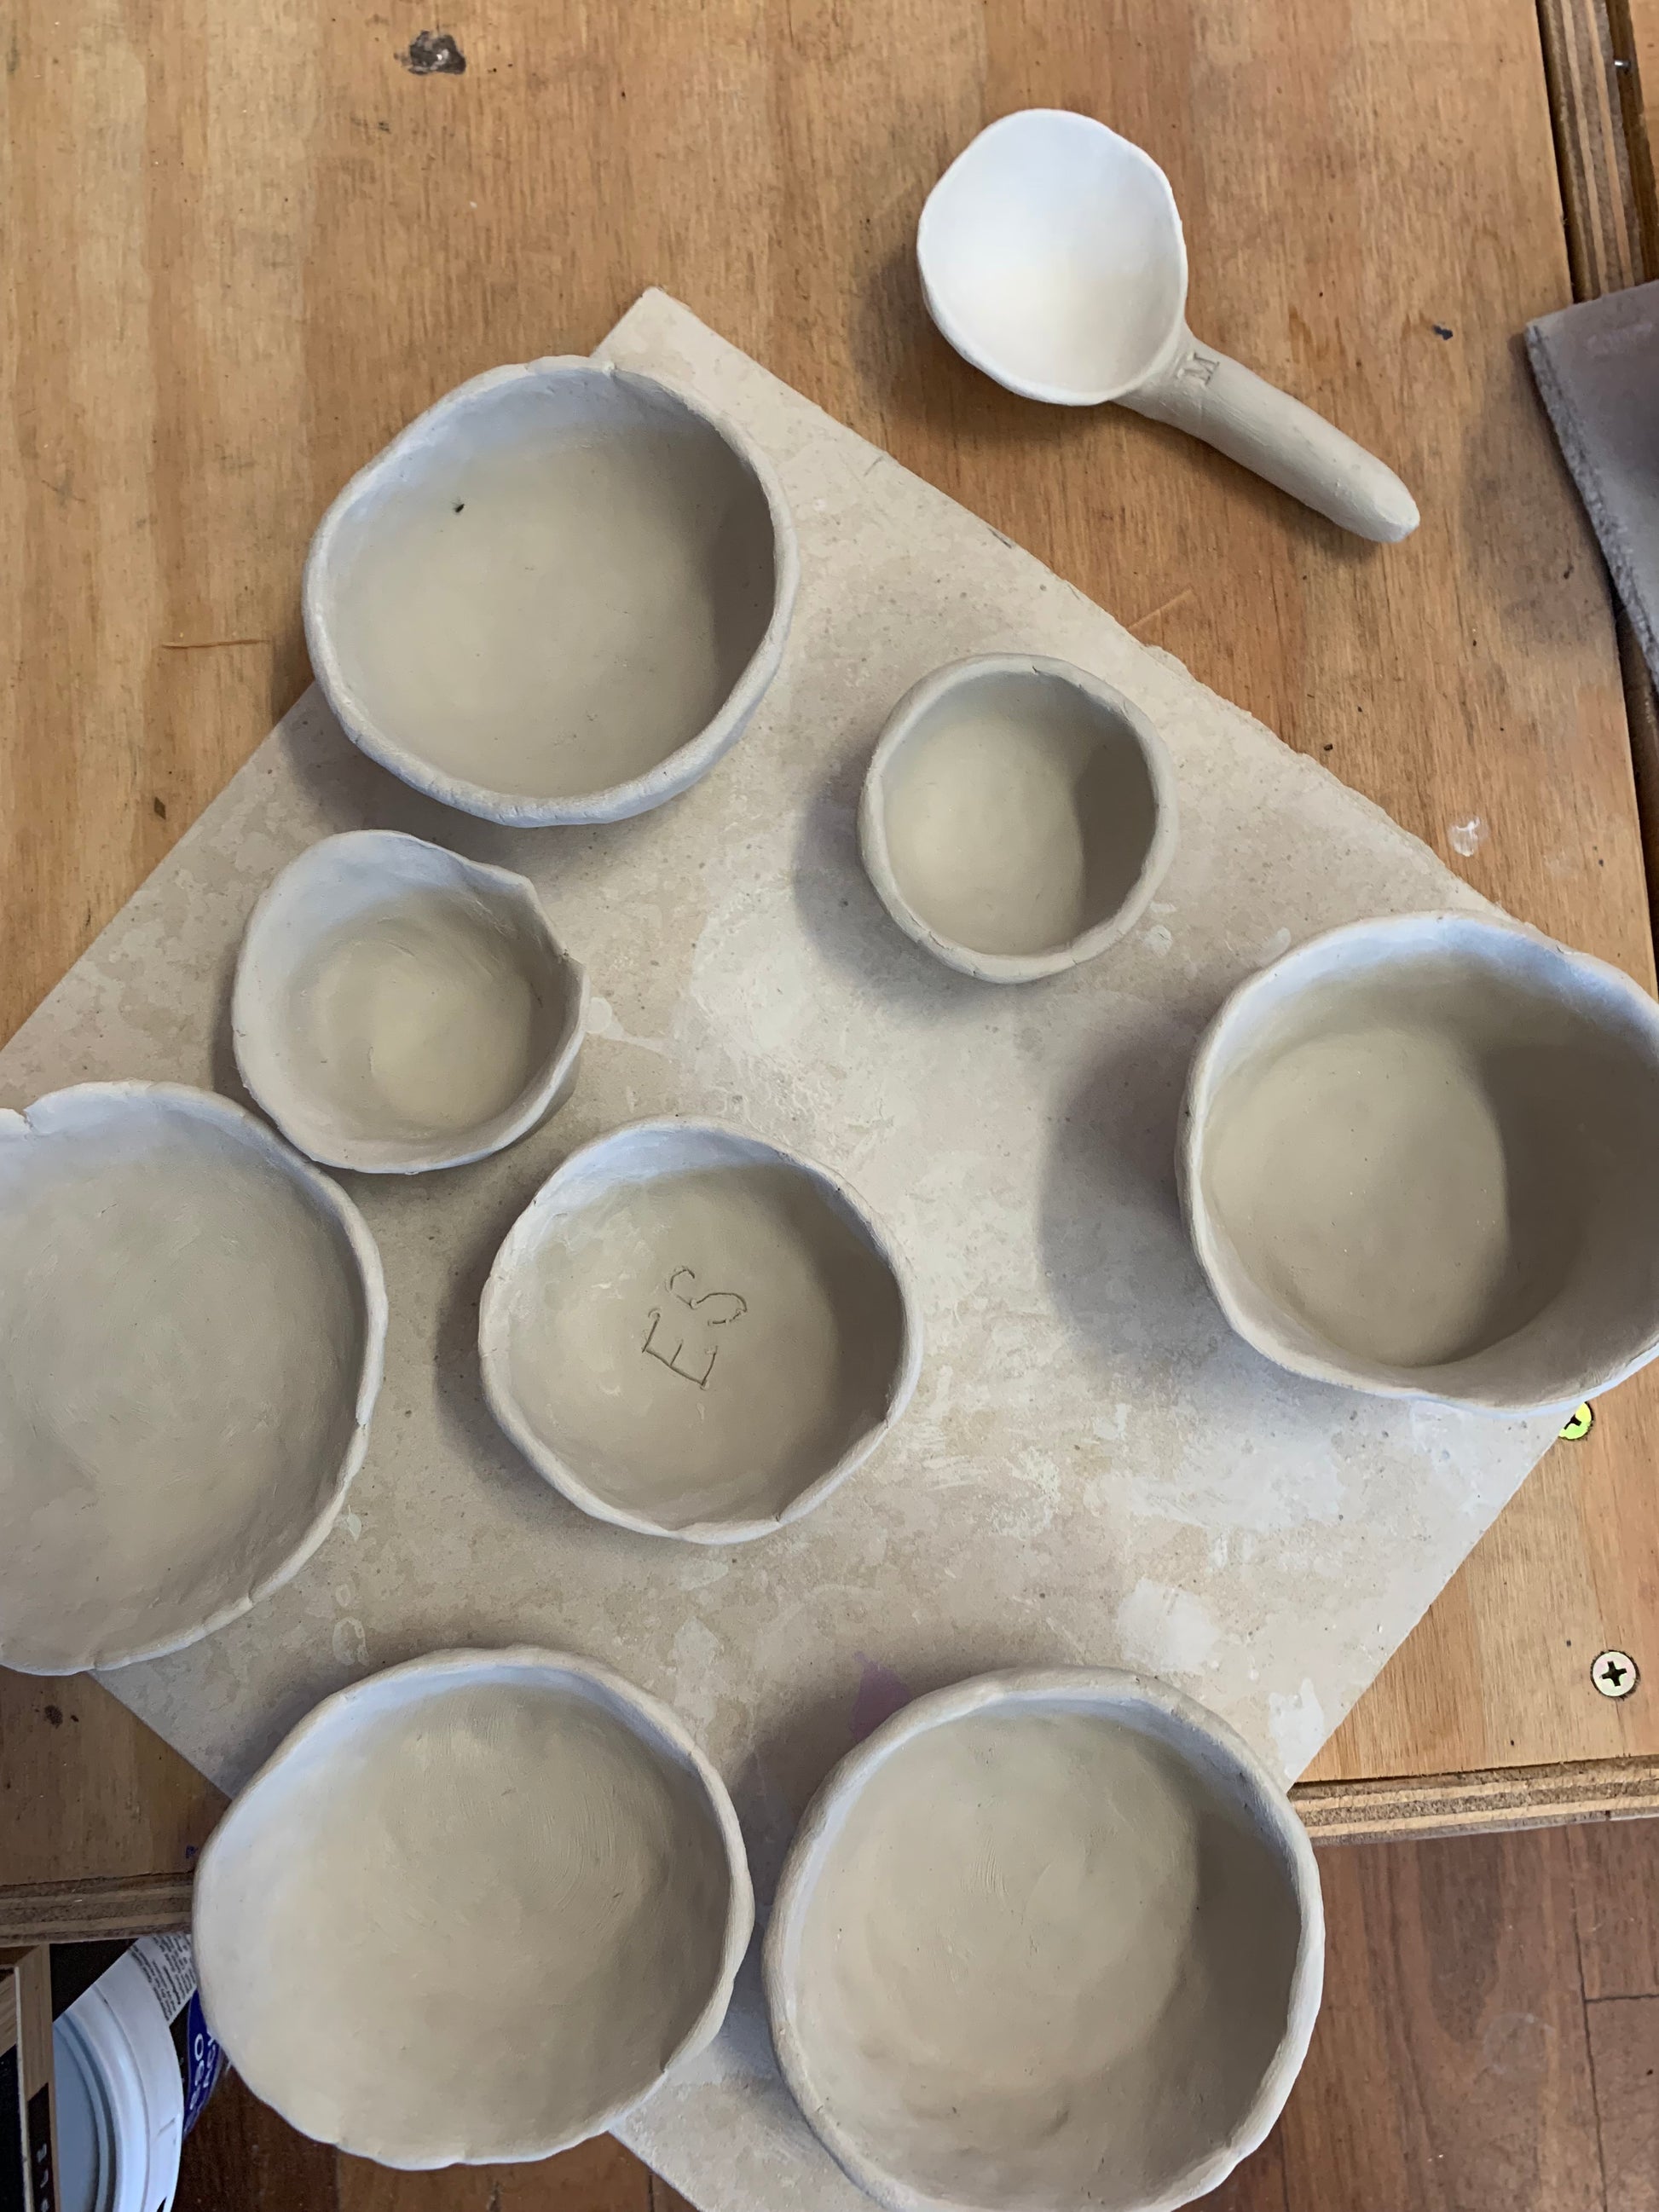 Birds eye view of 8 bowls of various sizes